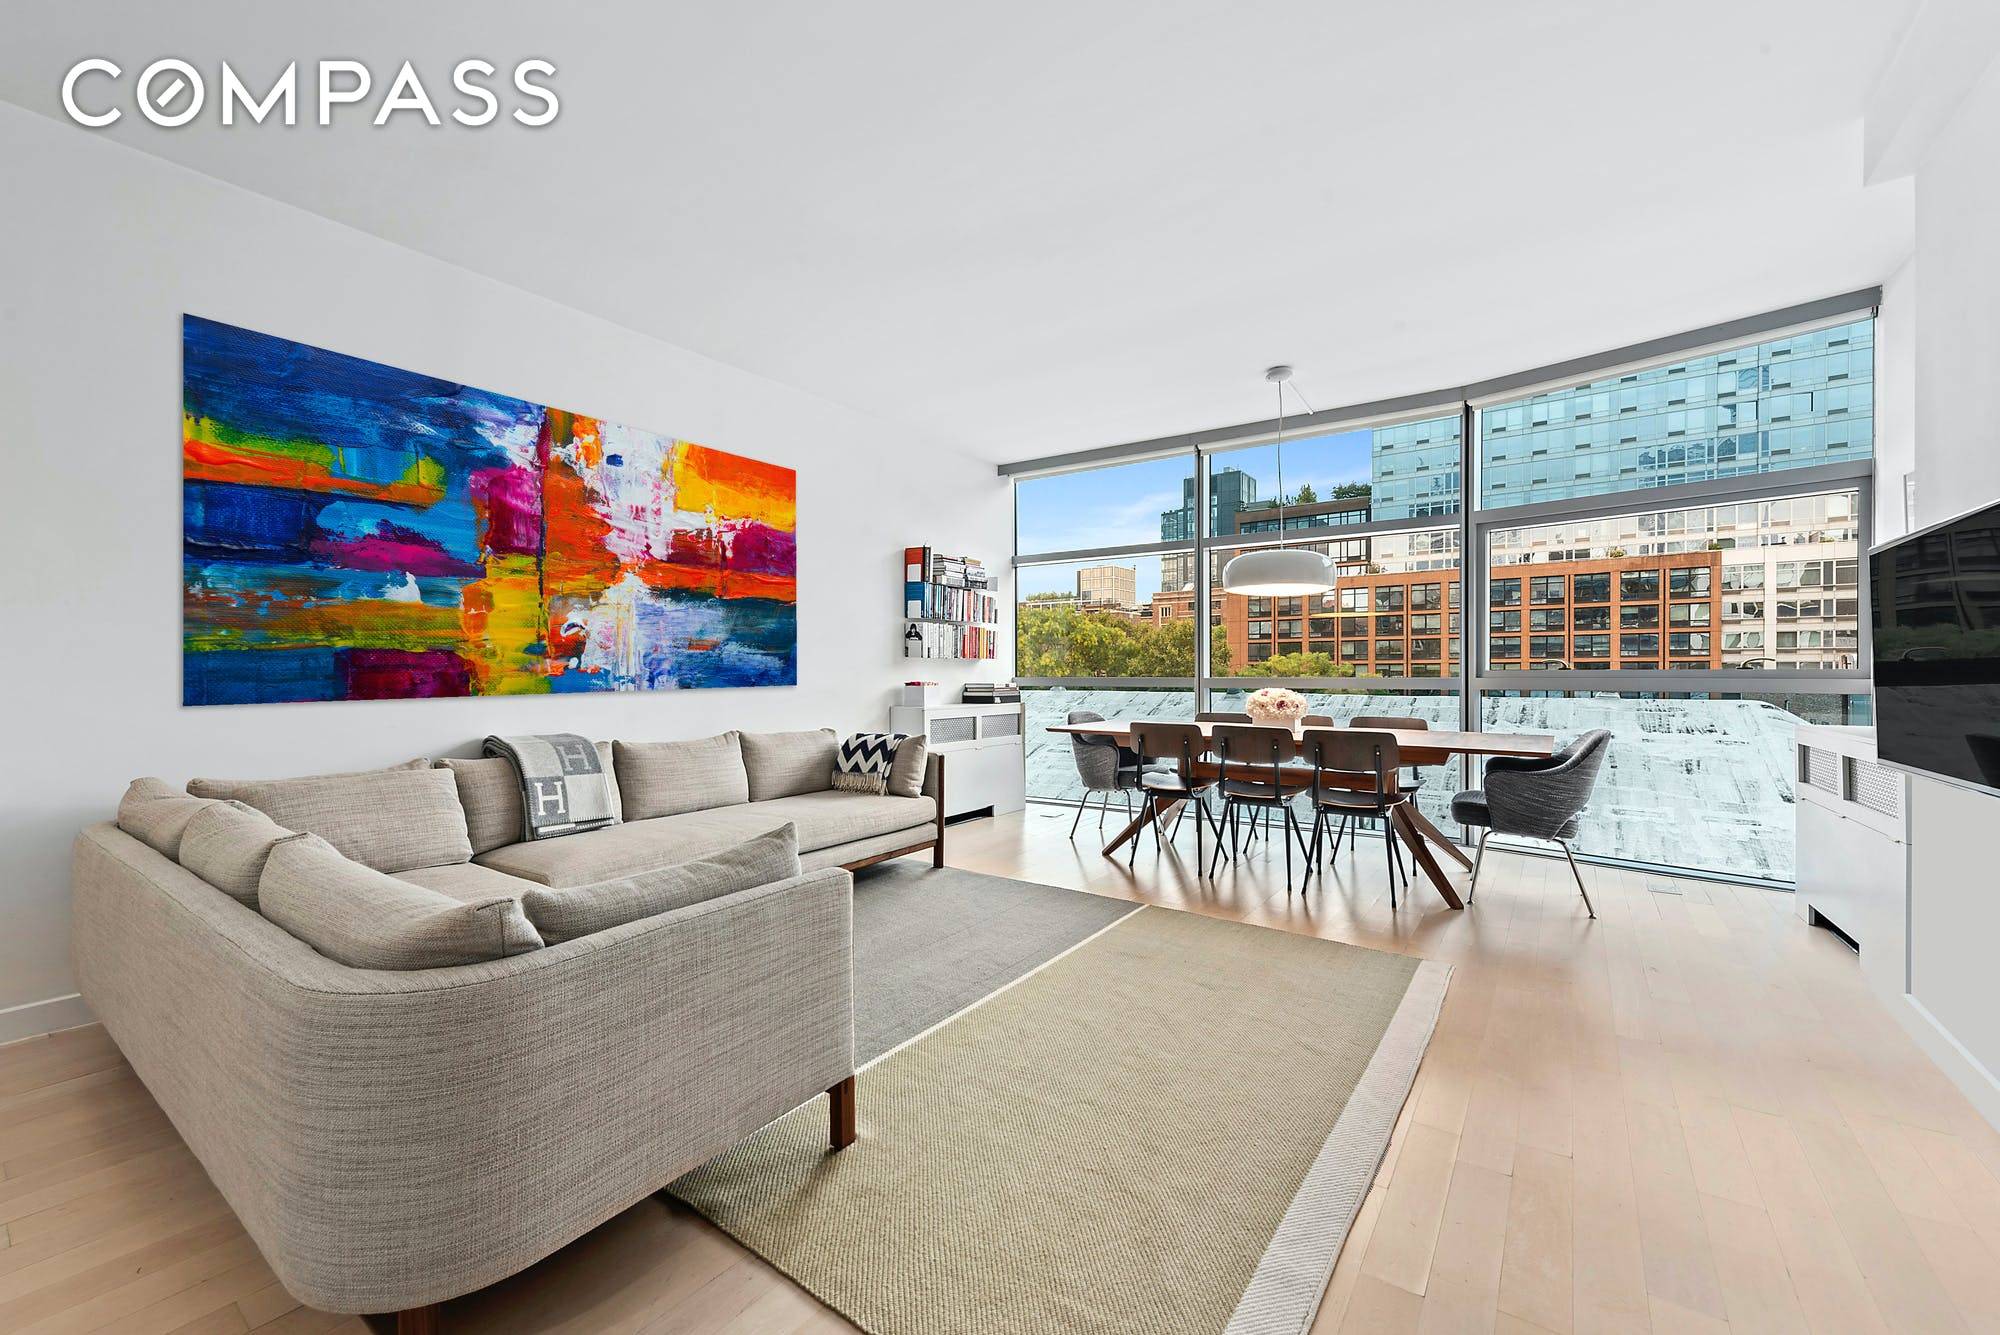 Live an artful life in this sleek loft like home in the heart of West Chelsea s Gallery District.